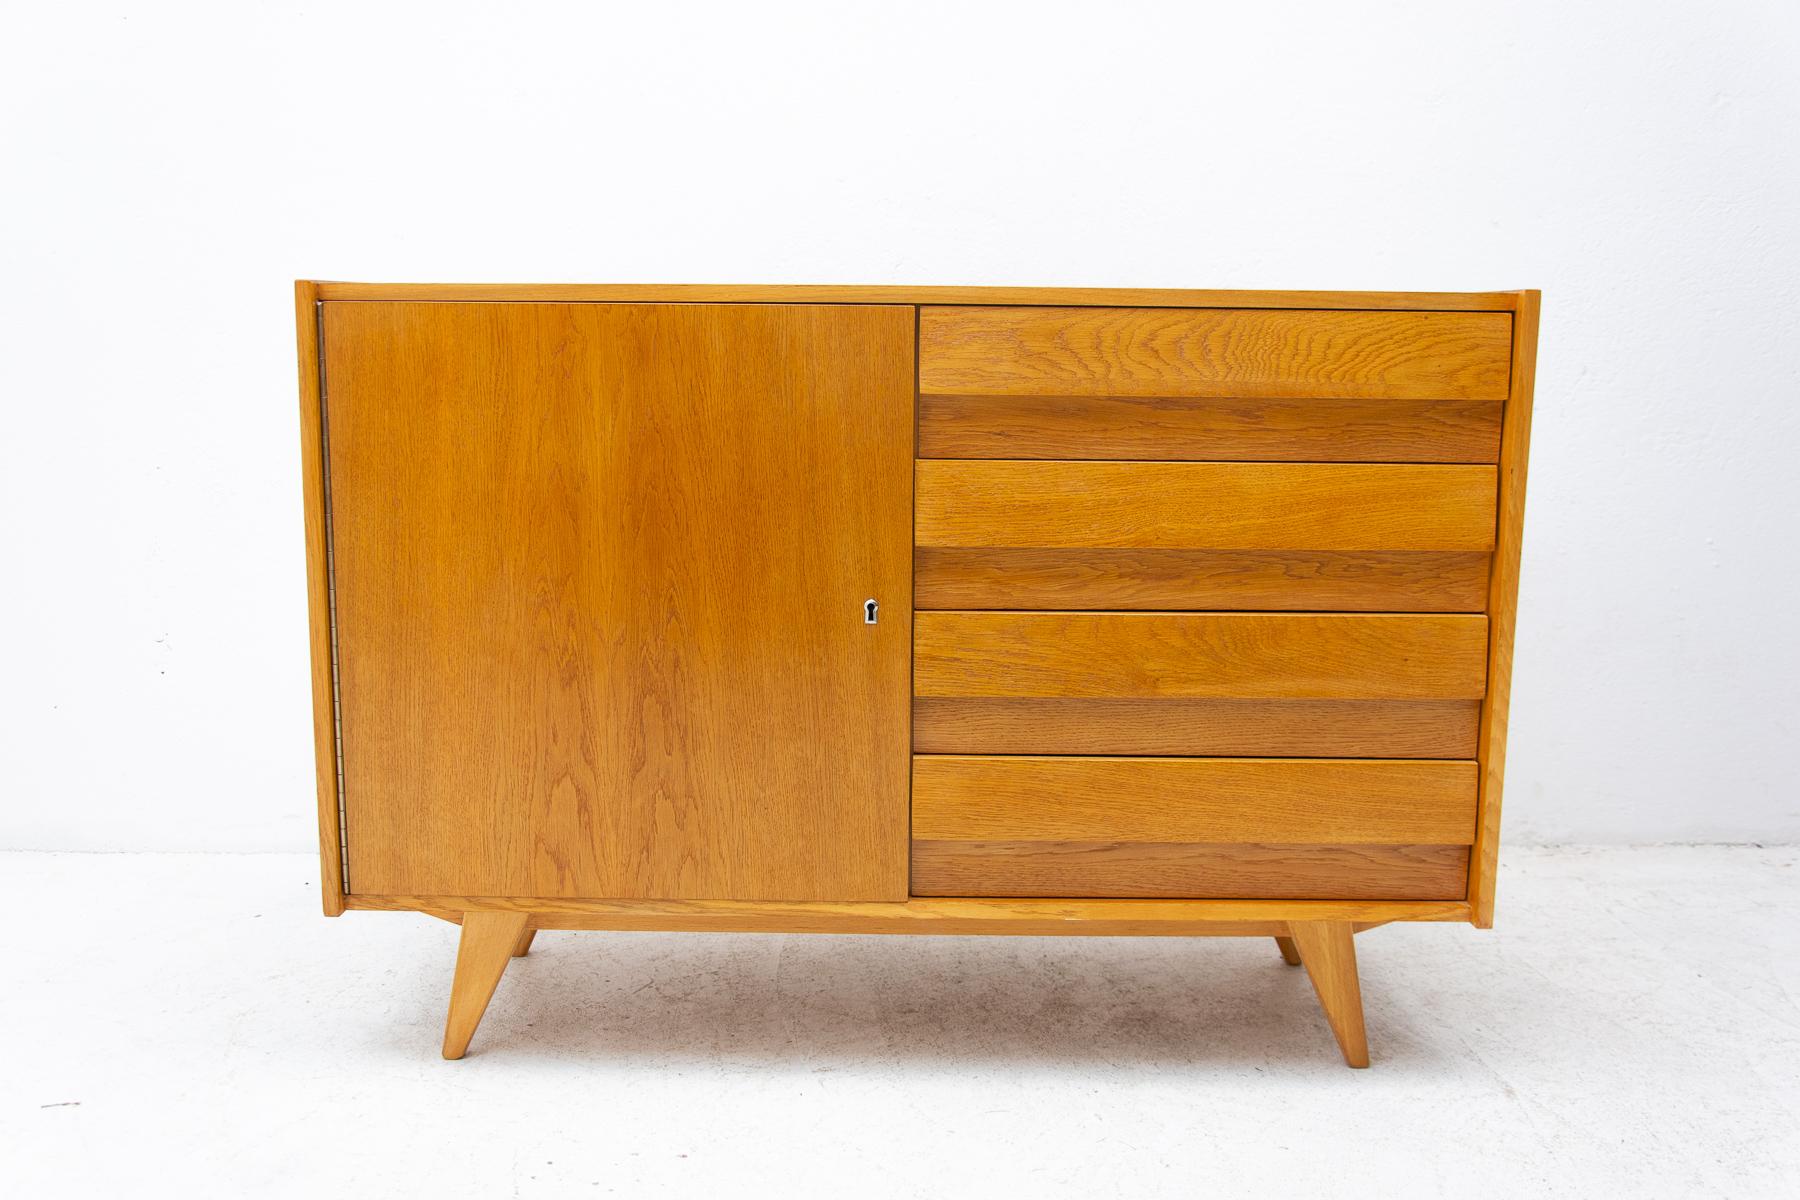 Mid-century chest of drawers, model no. U-458, designed by Jiri Jiroutek. It was made in the 1960´s and produced by “Interier Praha”. This model associated with world-renowned EXPO 58-“Brussels period”. It features Beech wood, plywood, veneered